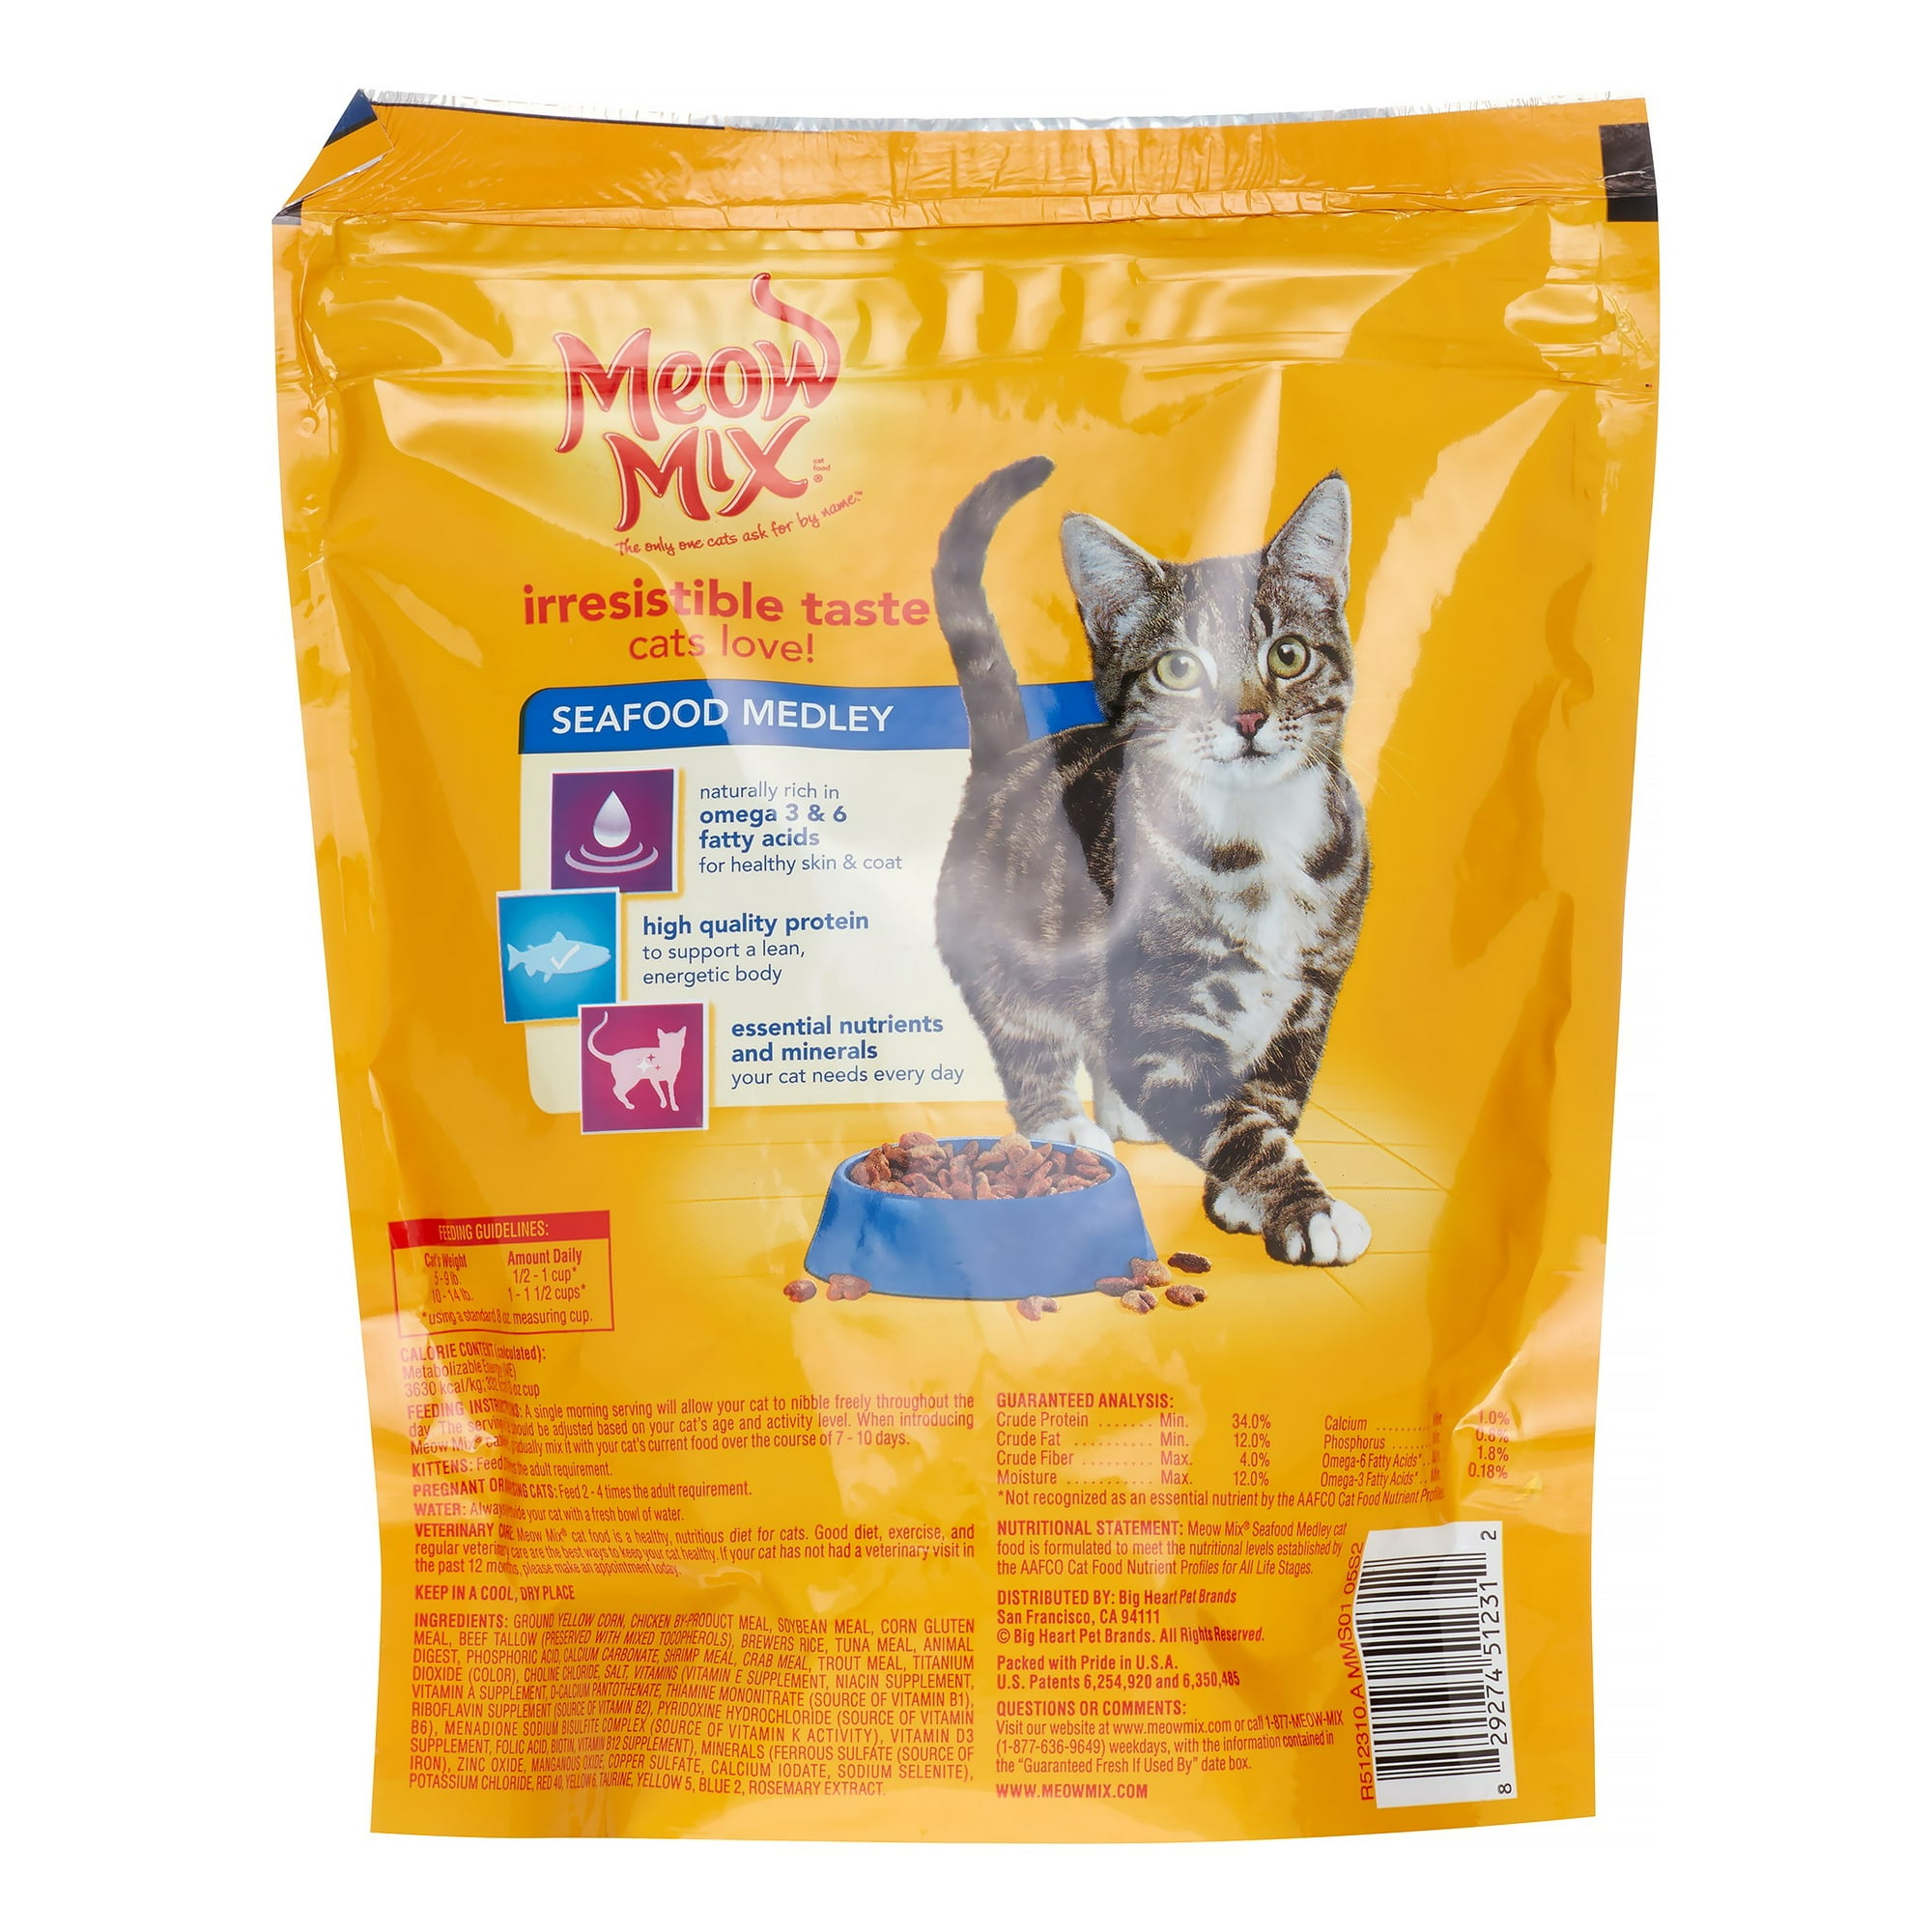 Meow Mix Seafood Medley Dry Cat Food, 18 oz